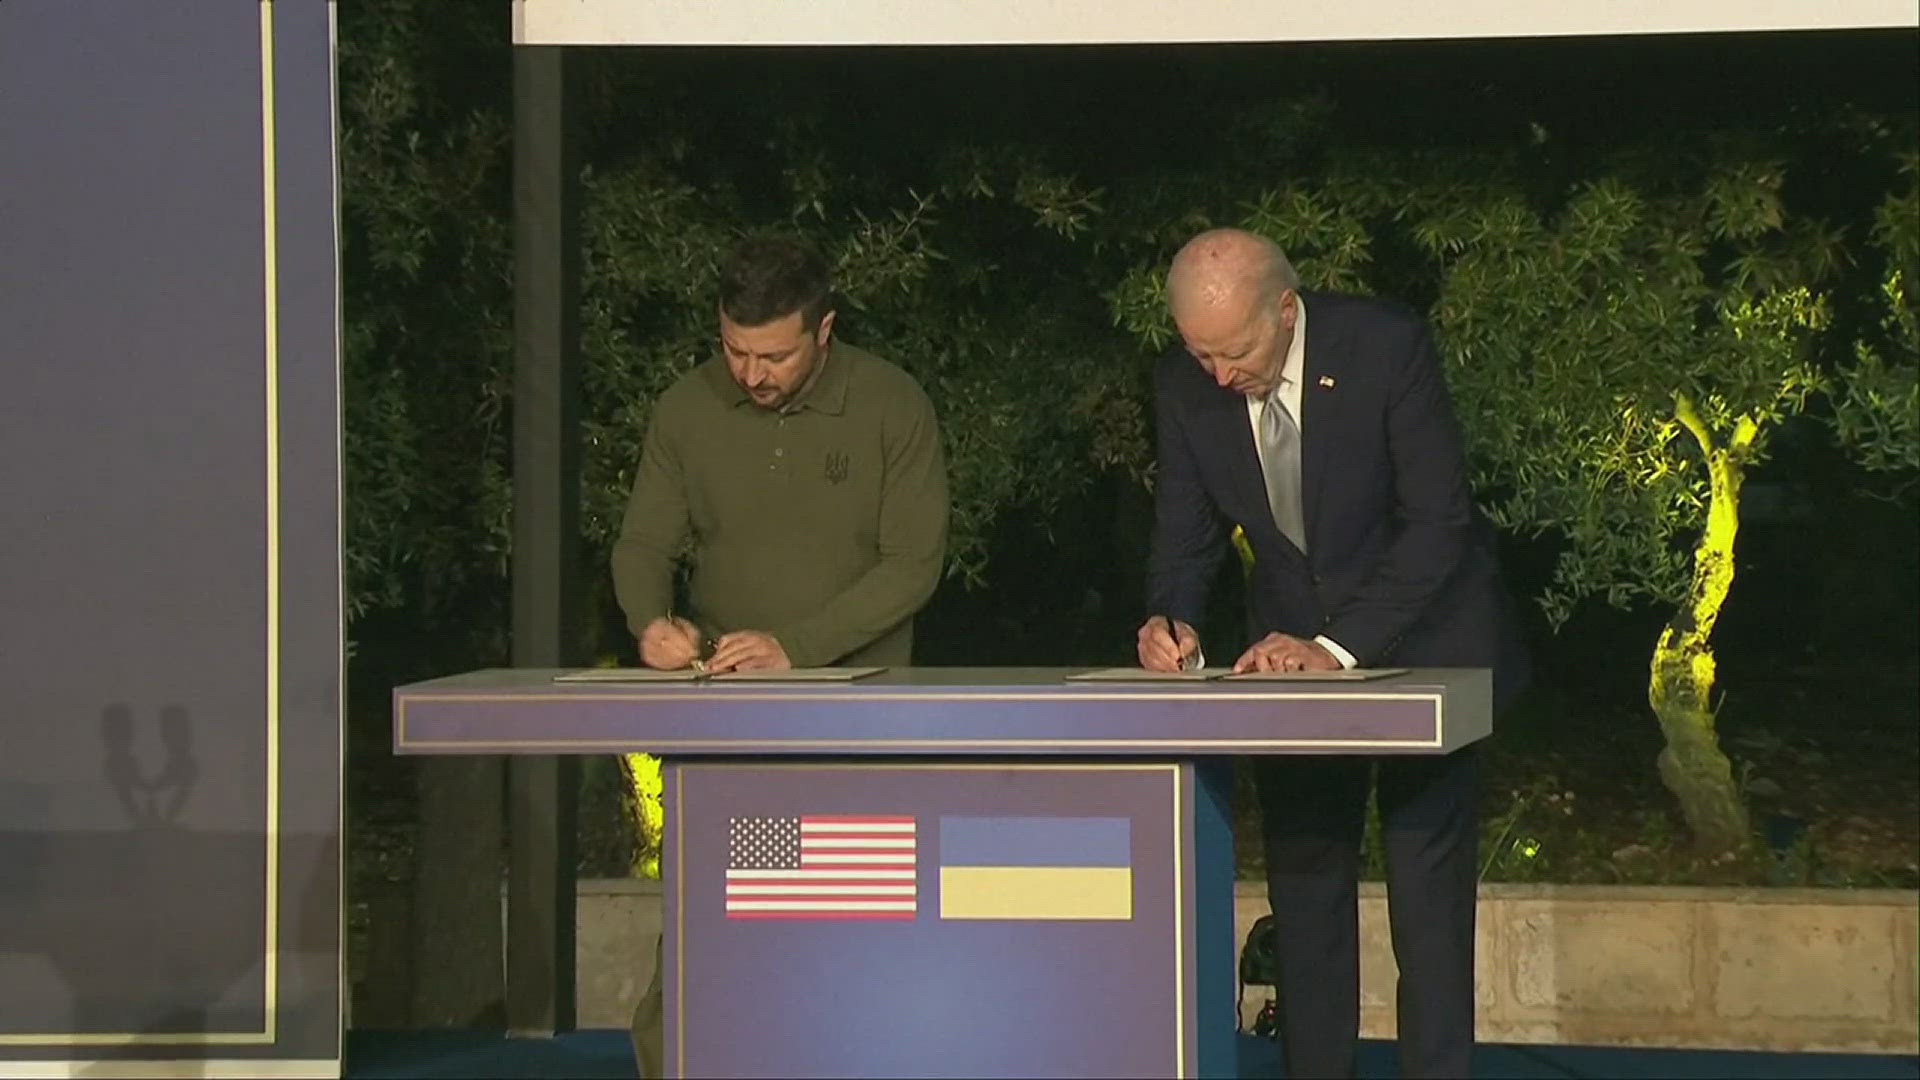 The two leaders signed a 10-year bilateral security agreement as Ukraine continues its war against Russia.